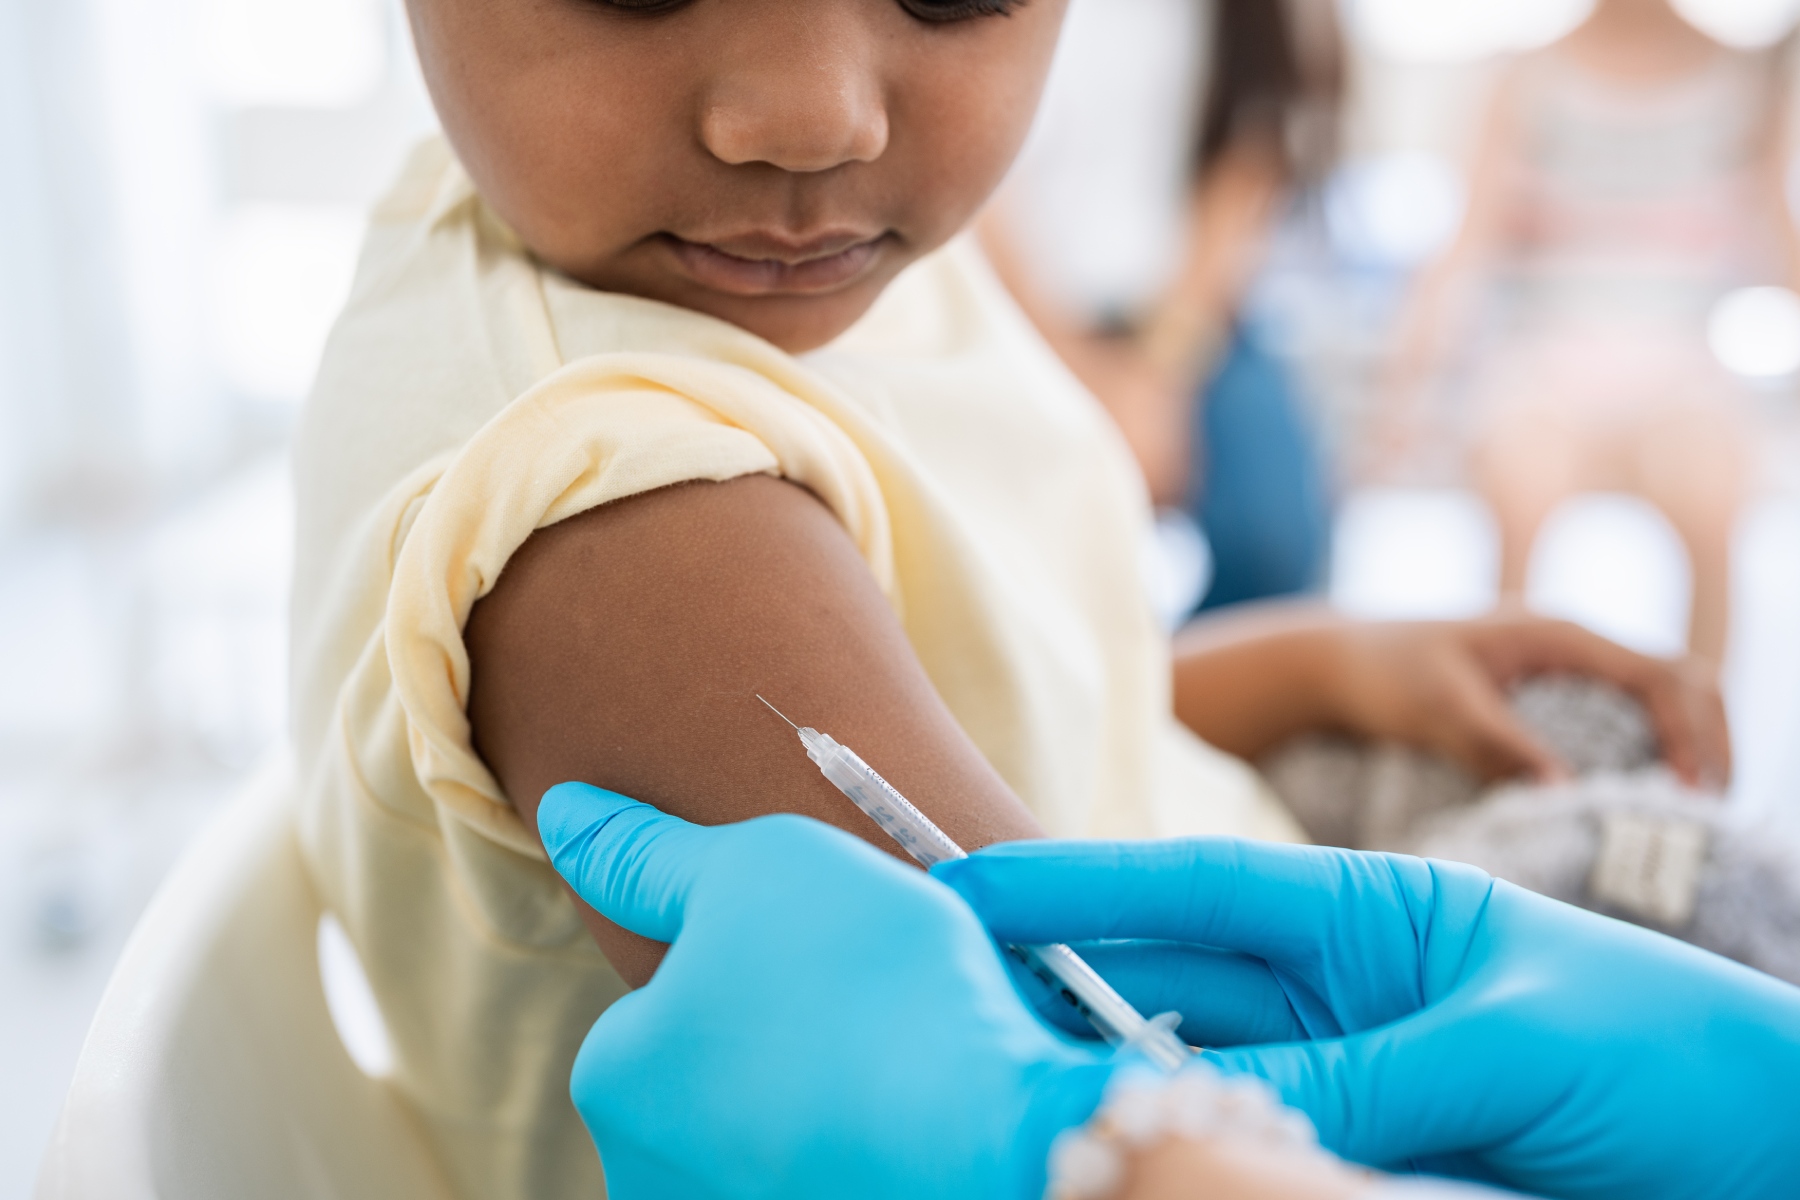 a close-up shot of a Thai child receiving a vaccine from a healthcare worker who wears blue latex gloves